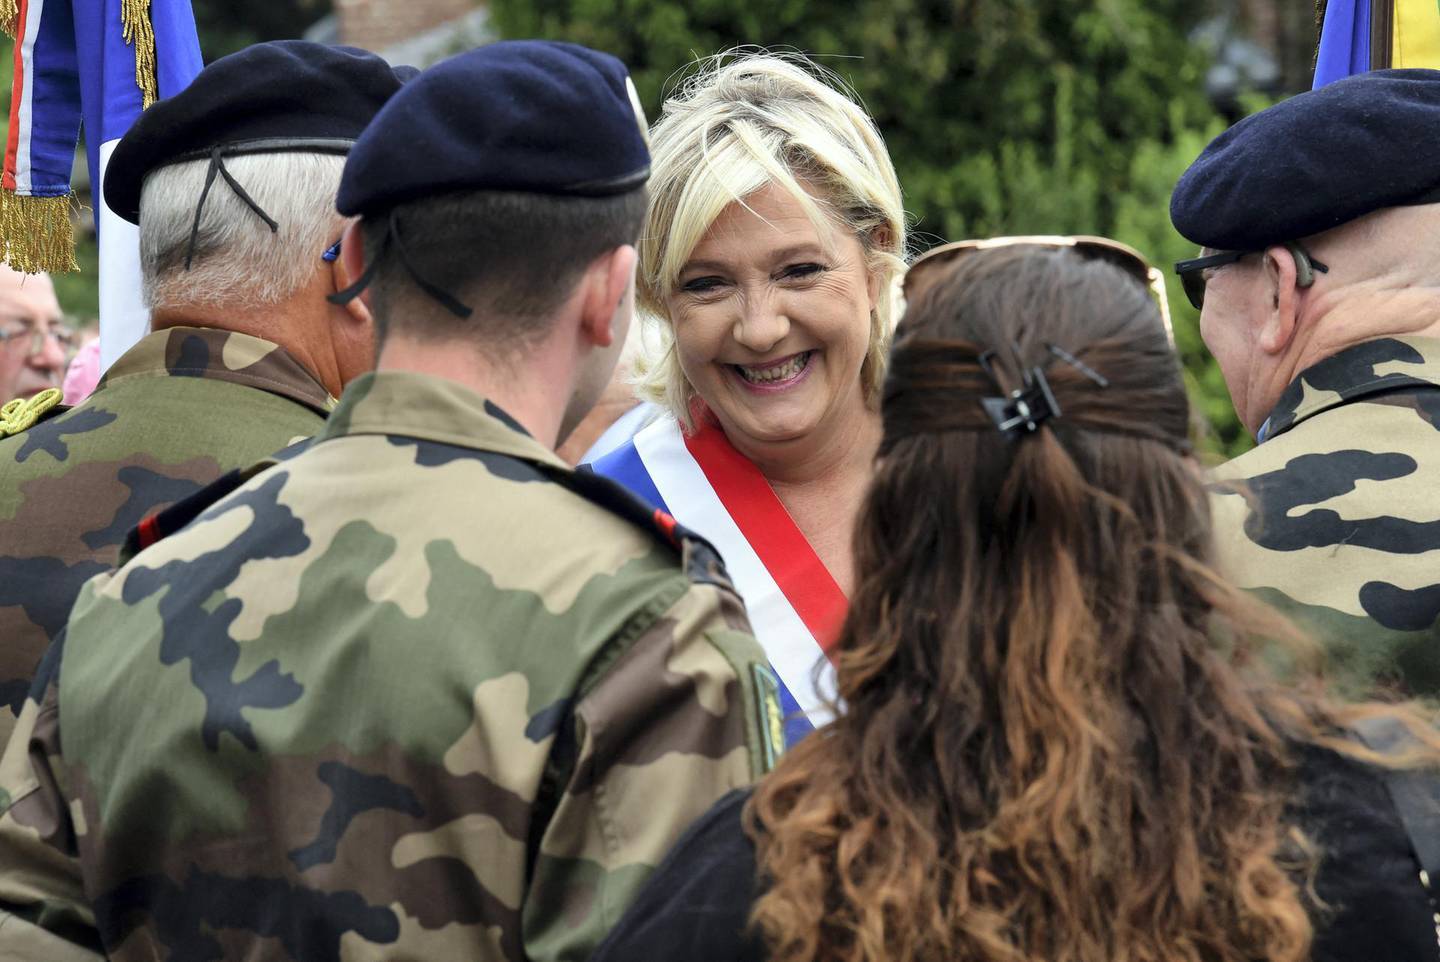 Far-right Front National (FN) party member of parliament Marine Le Pen speaks with military personnel as she attend the annual Bastille Day celebrations in Henin-Beaumont, northwestern France on July 14, 2017. (Photo by FRANCOIS LO PRESTI / AFP)